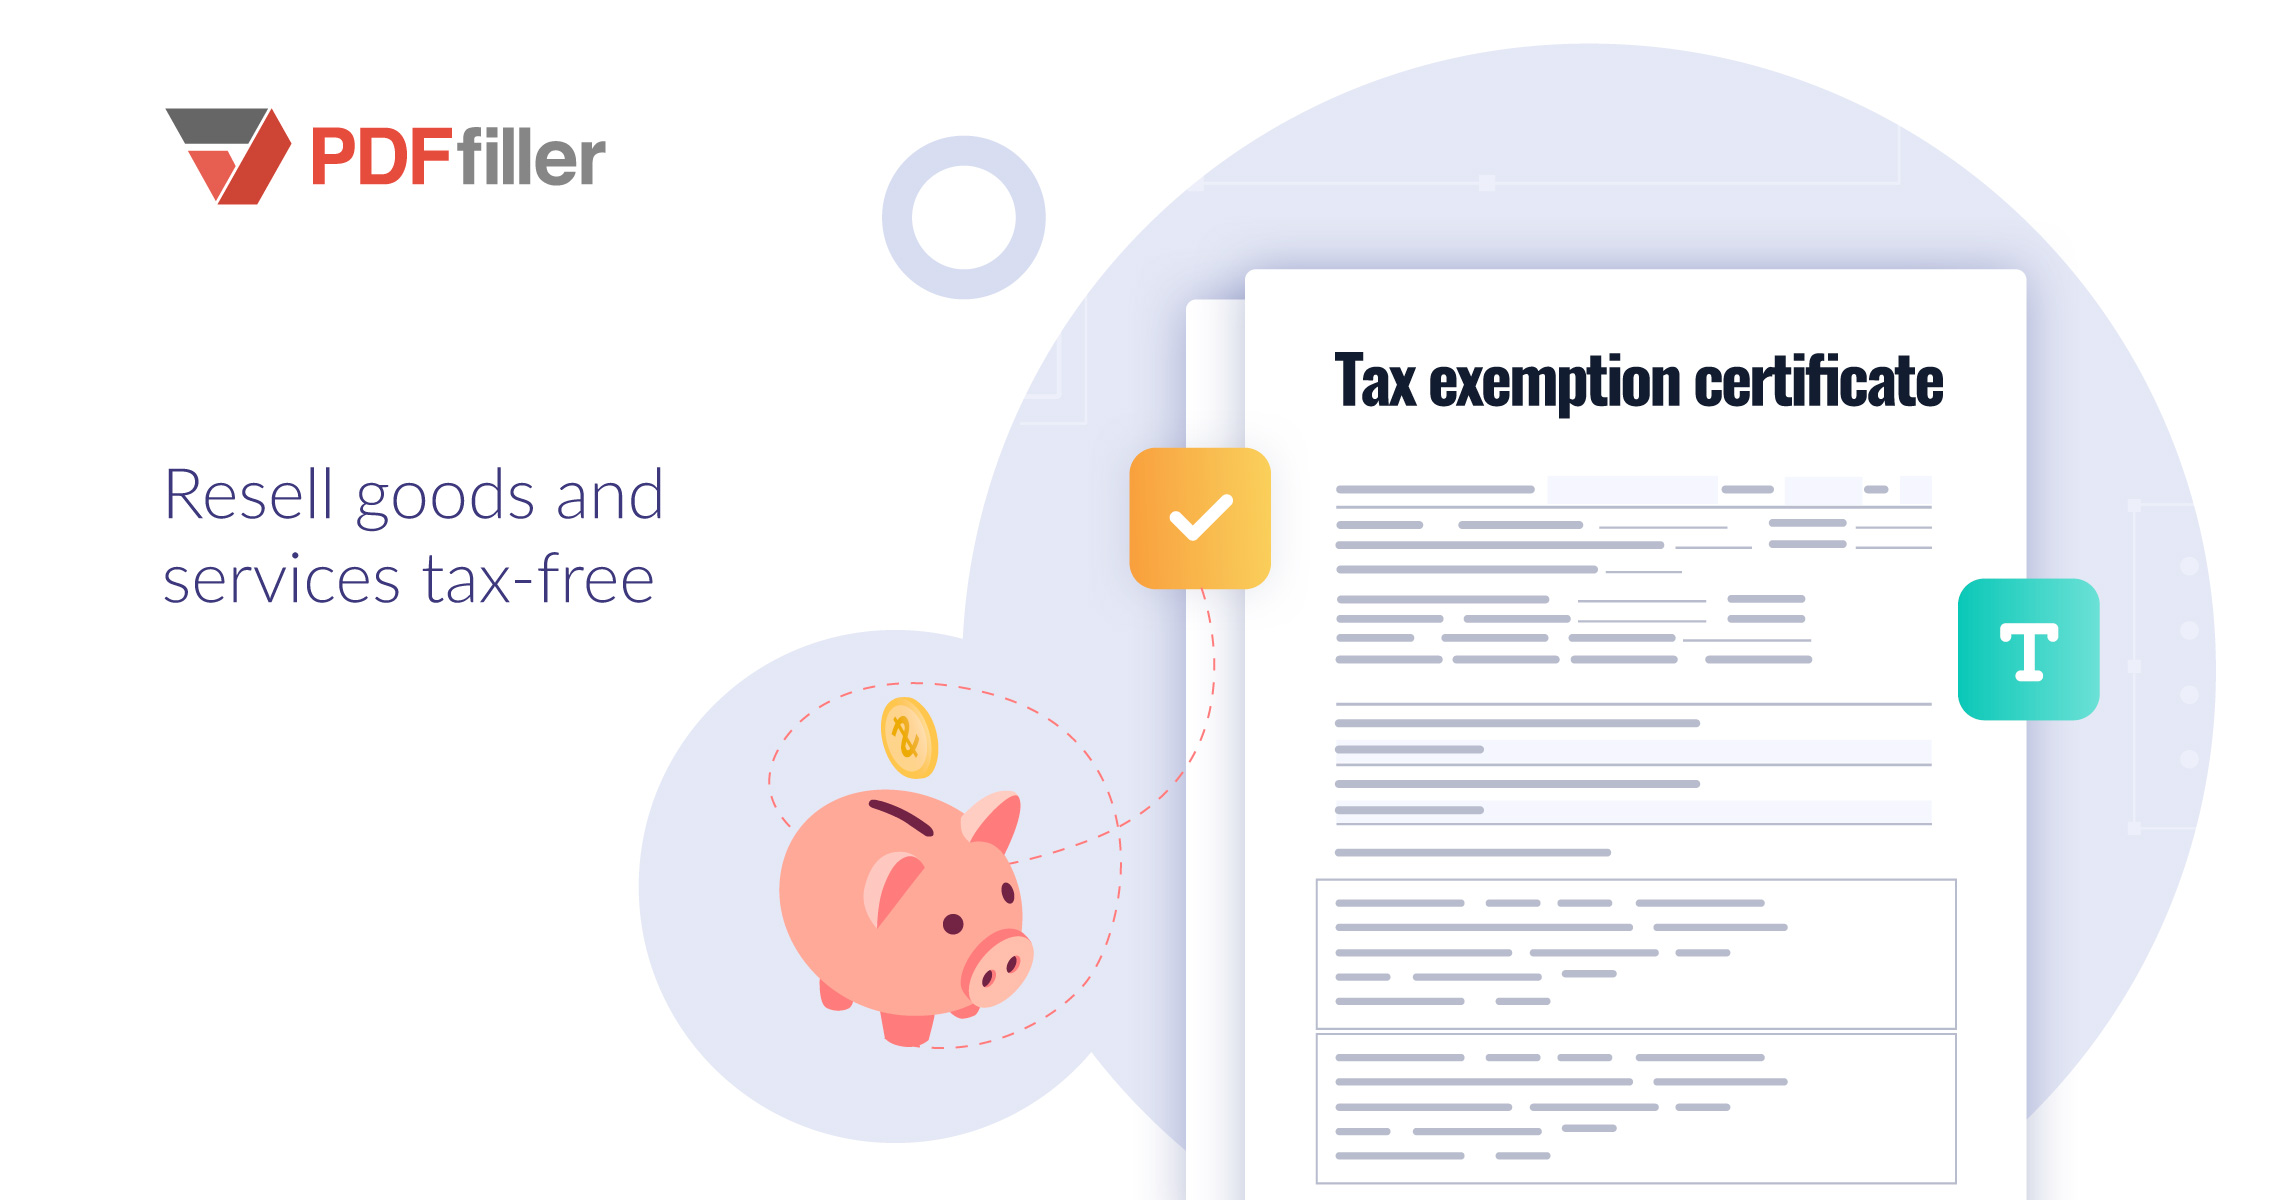 IRS tax exmprion forms, tax form catalog, digital workflow